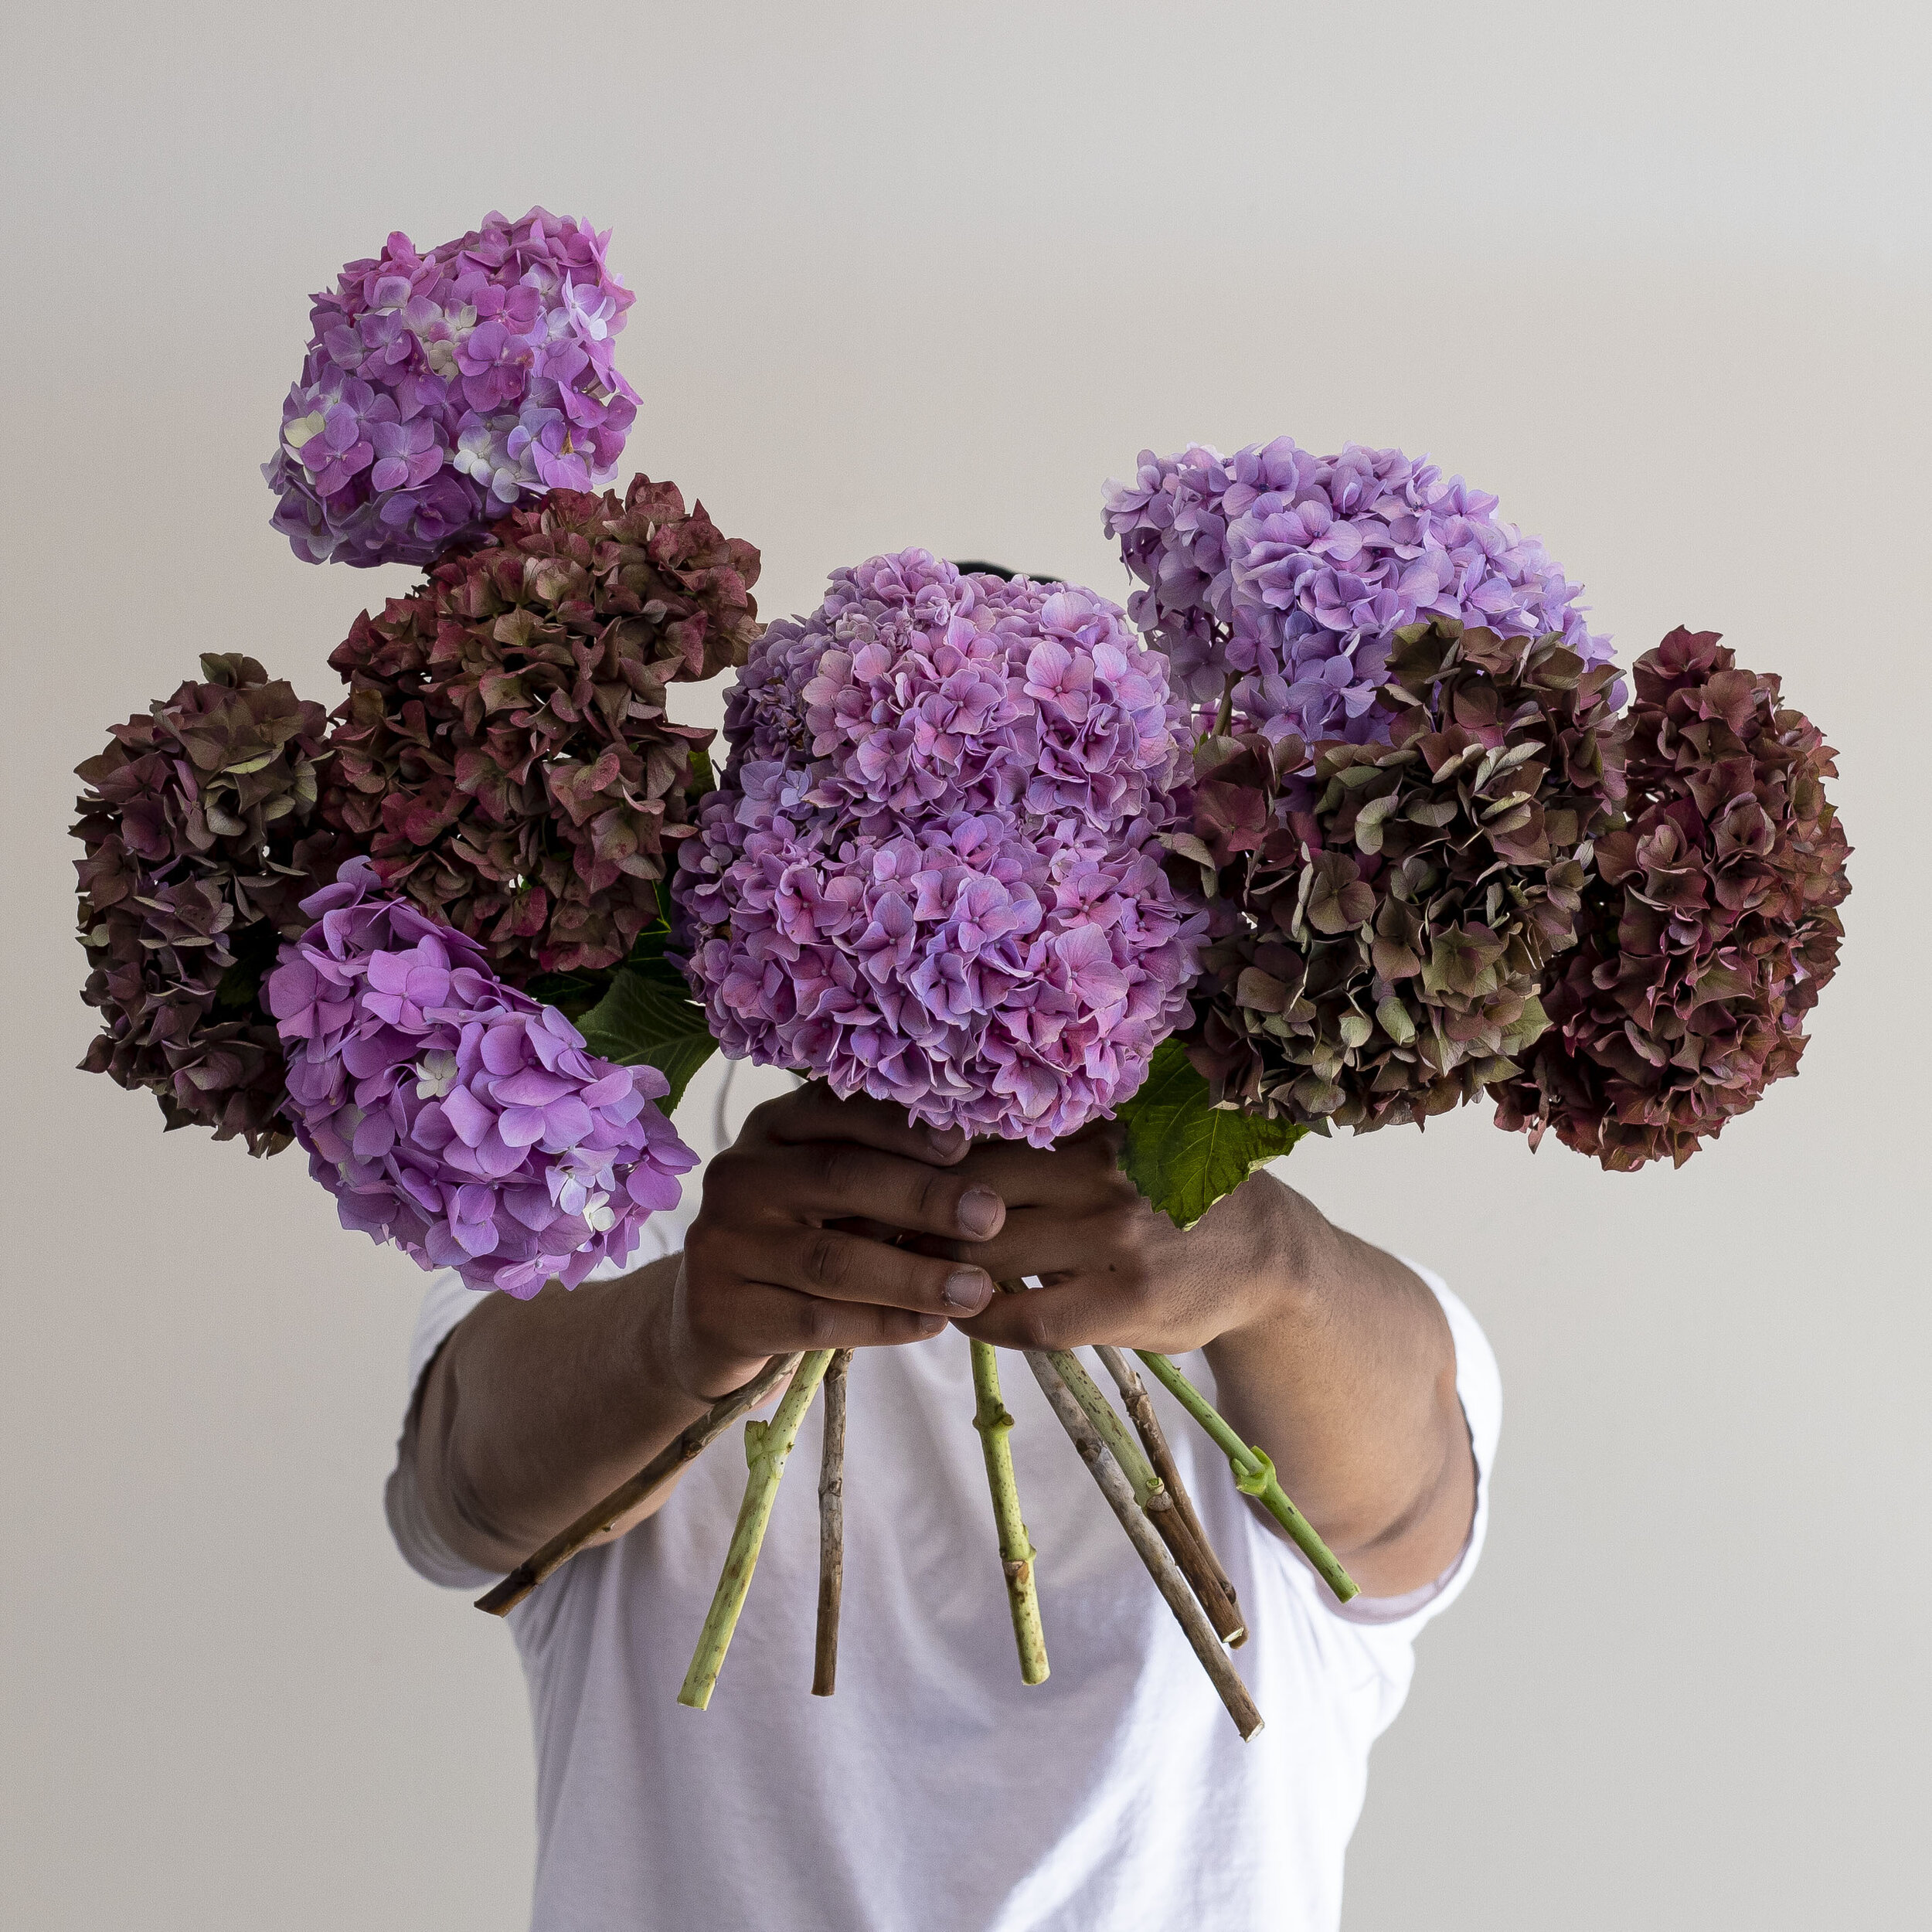 A person holding up an arrangement of purple hydrangea stems in front of a gray background